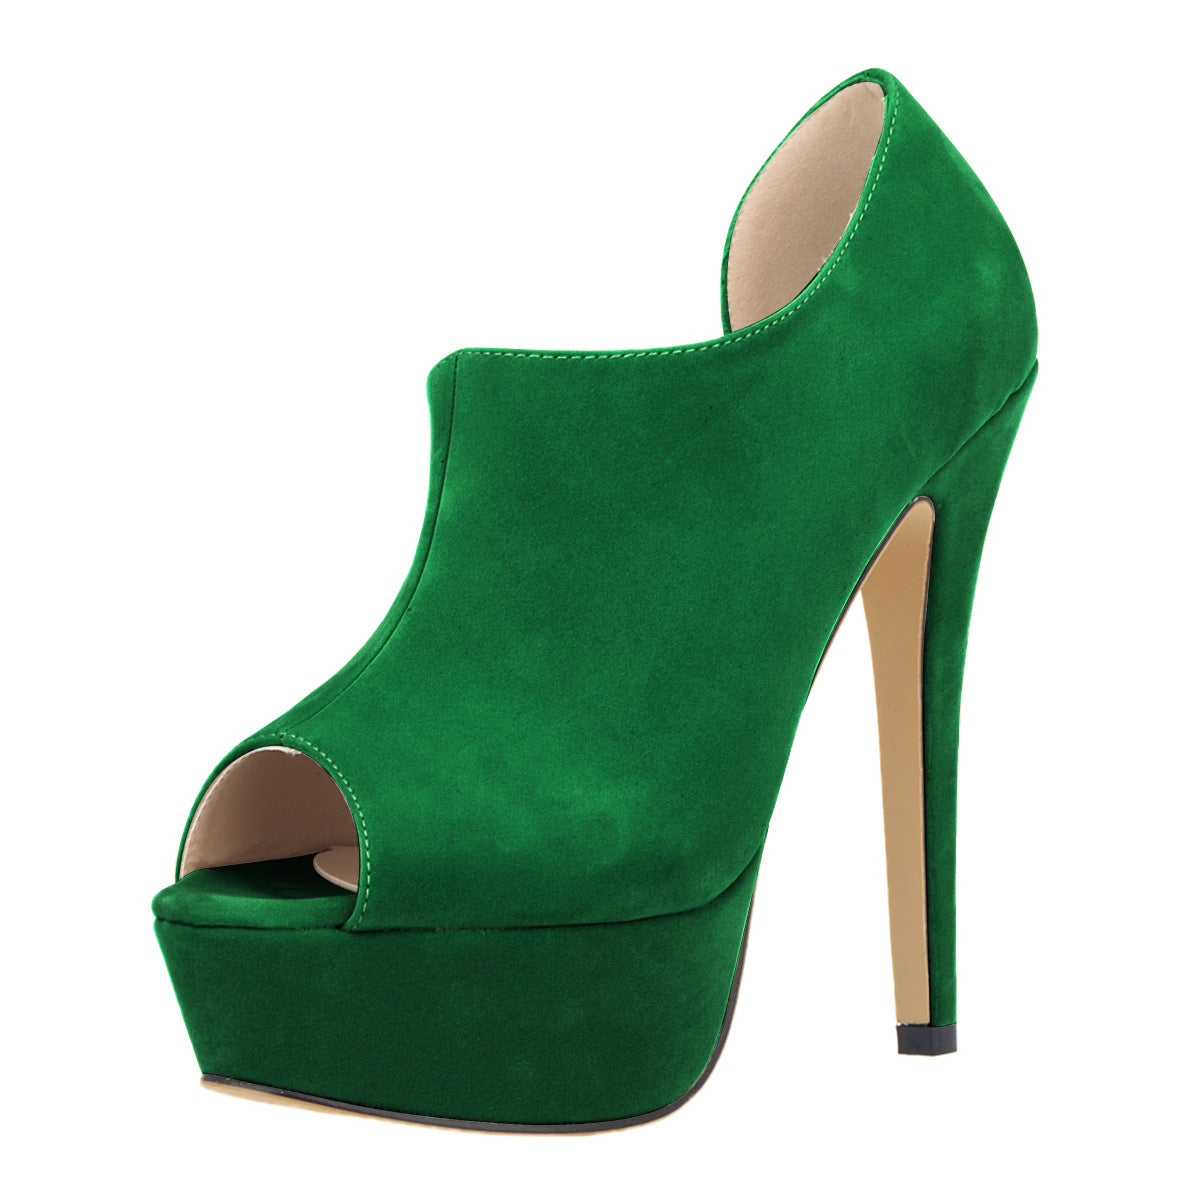 Candy Color Peep Toe Low Cut High Stiletto Heels Prom Shoes